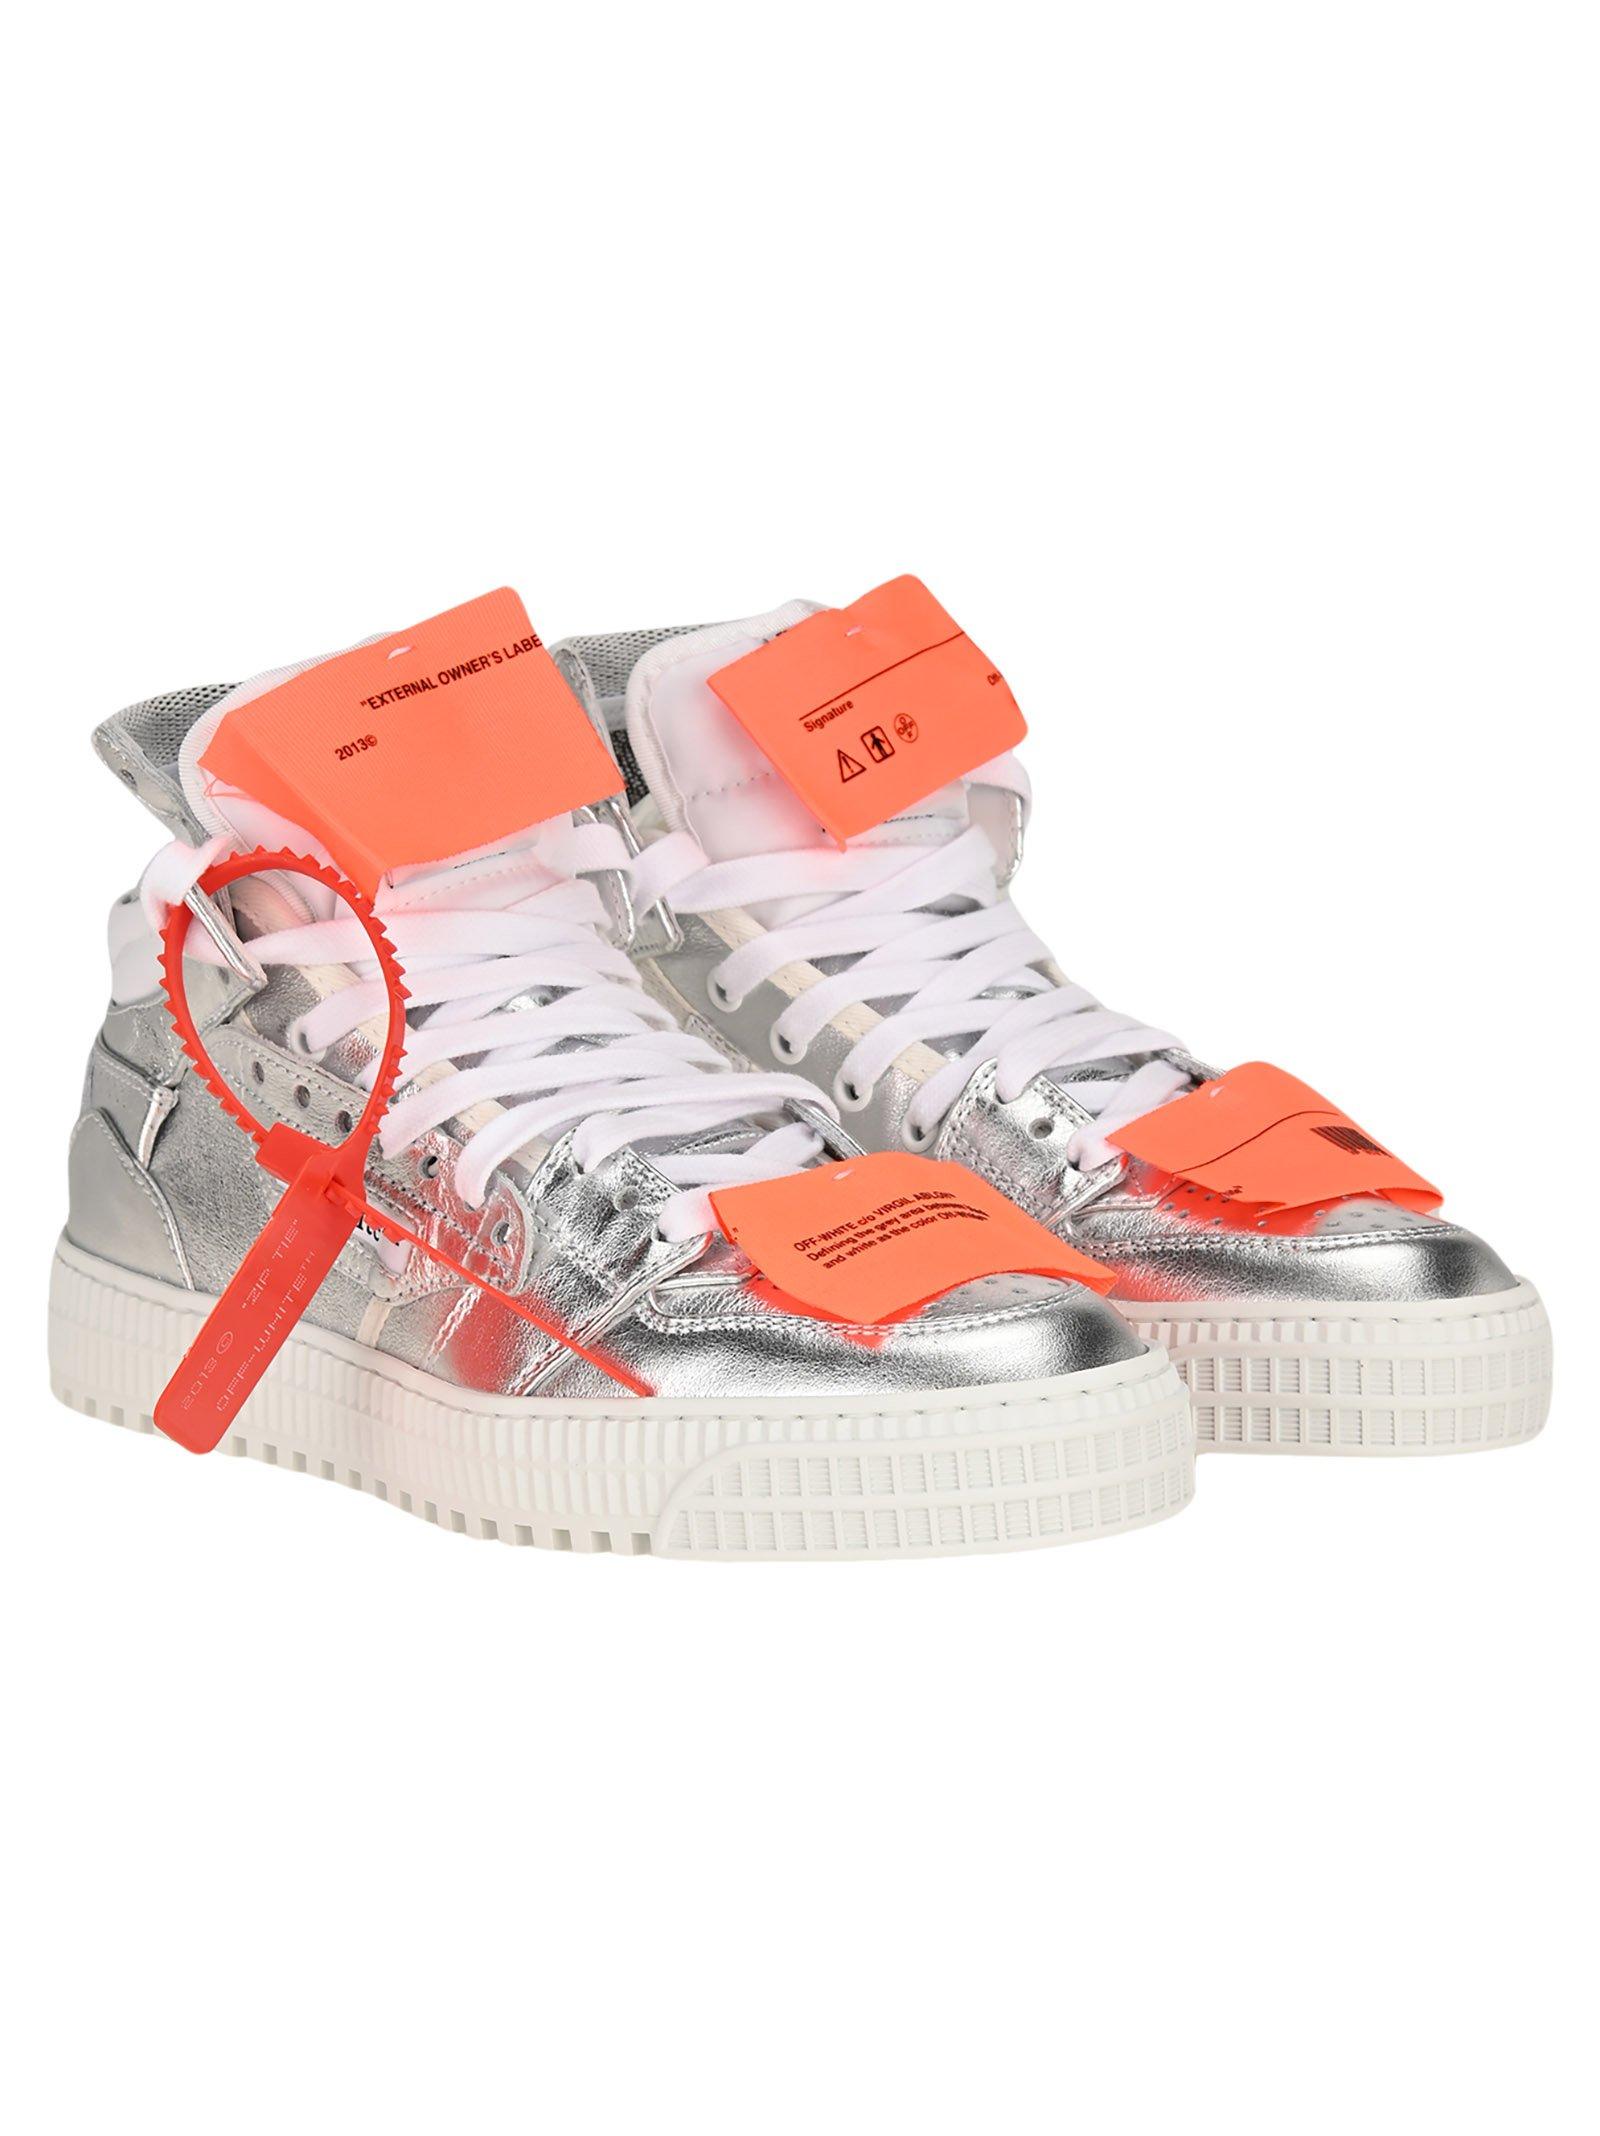 NWT OFF-WHITE C/O VIRGIL ABLOH Red 3.0 Off Court Sneakers Size 8/41 $760